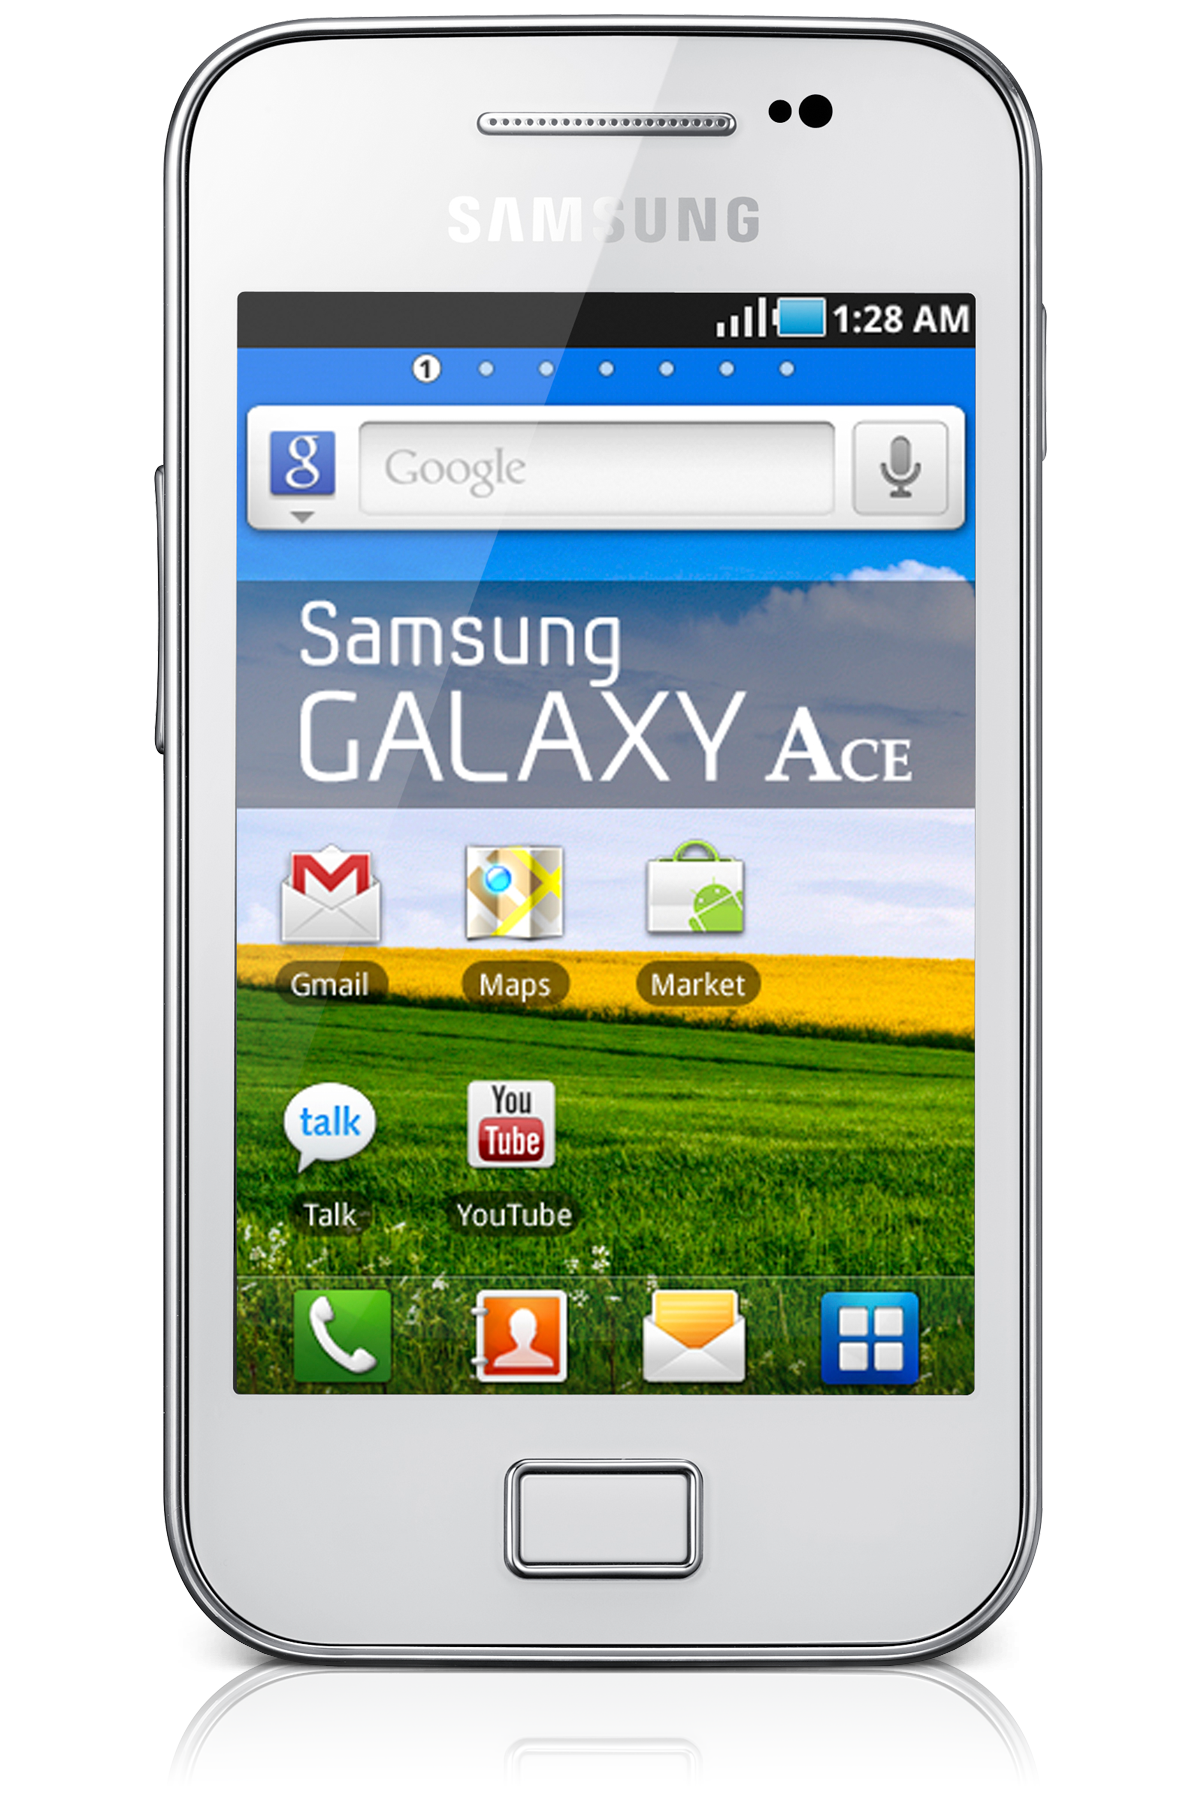 Smartphone on Le Smartphone Android Ultra Design Samsung Galaxy Ace Le Smartphone